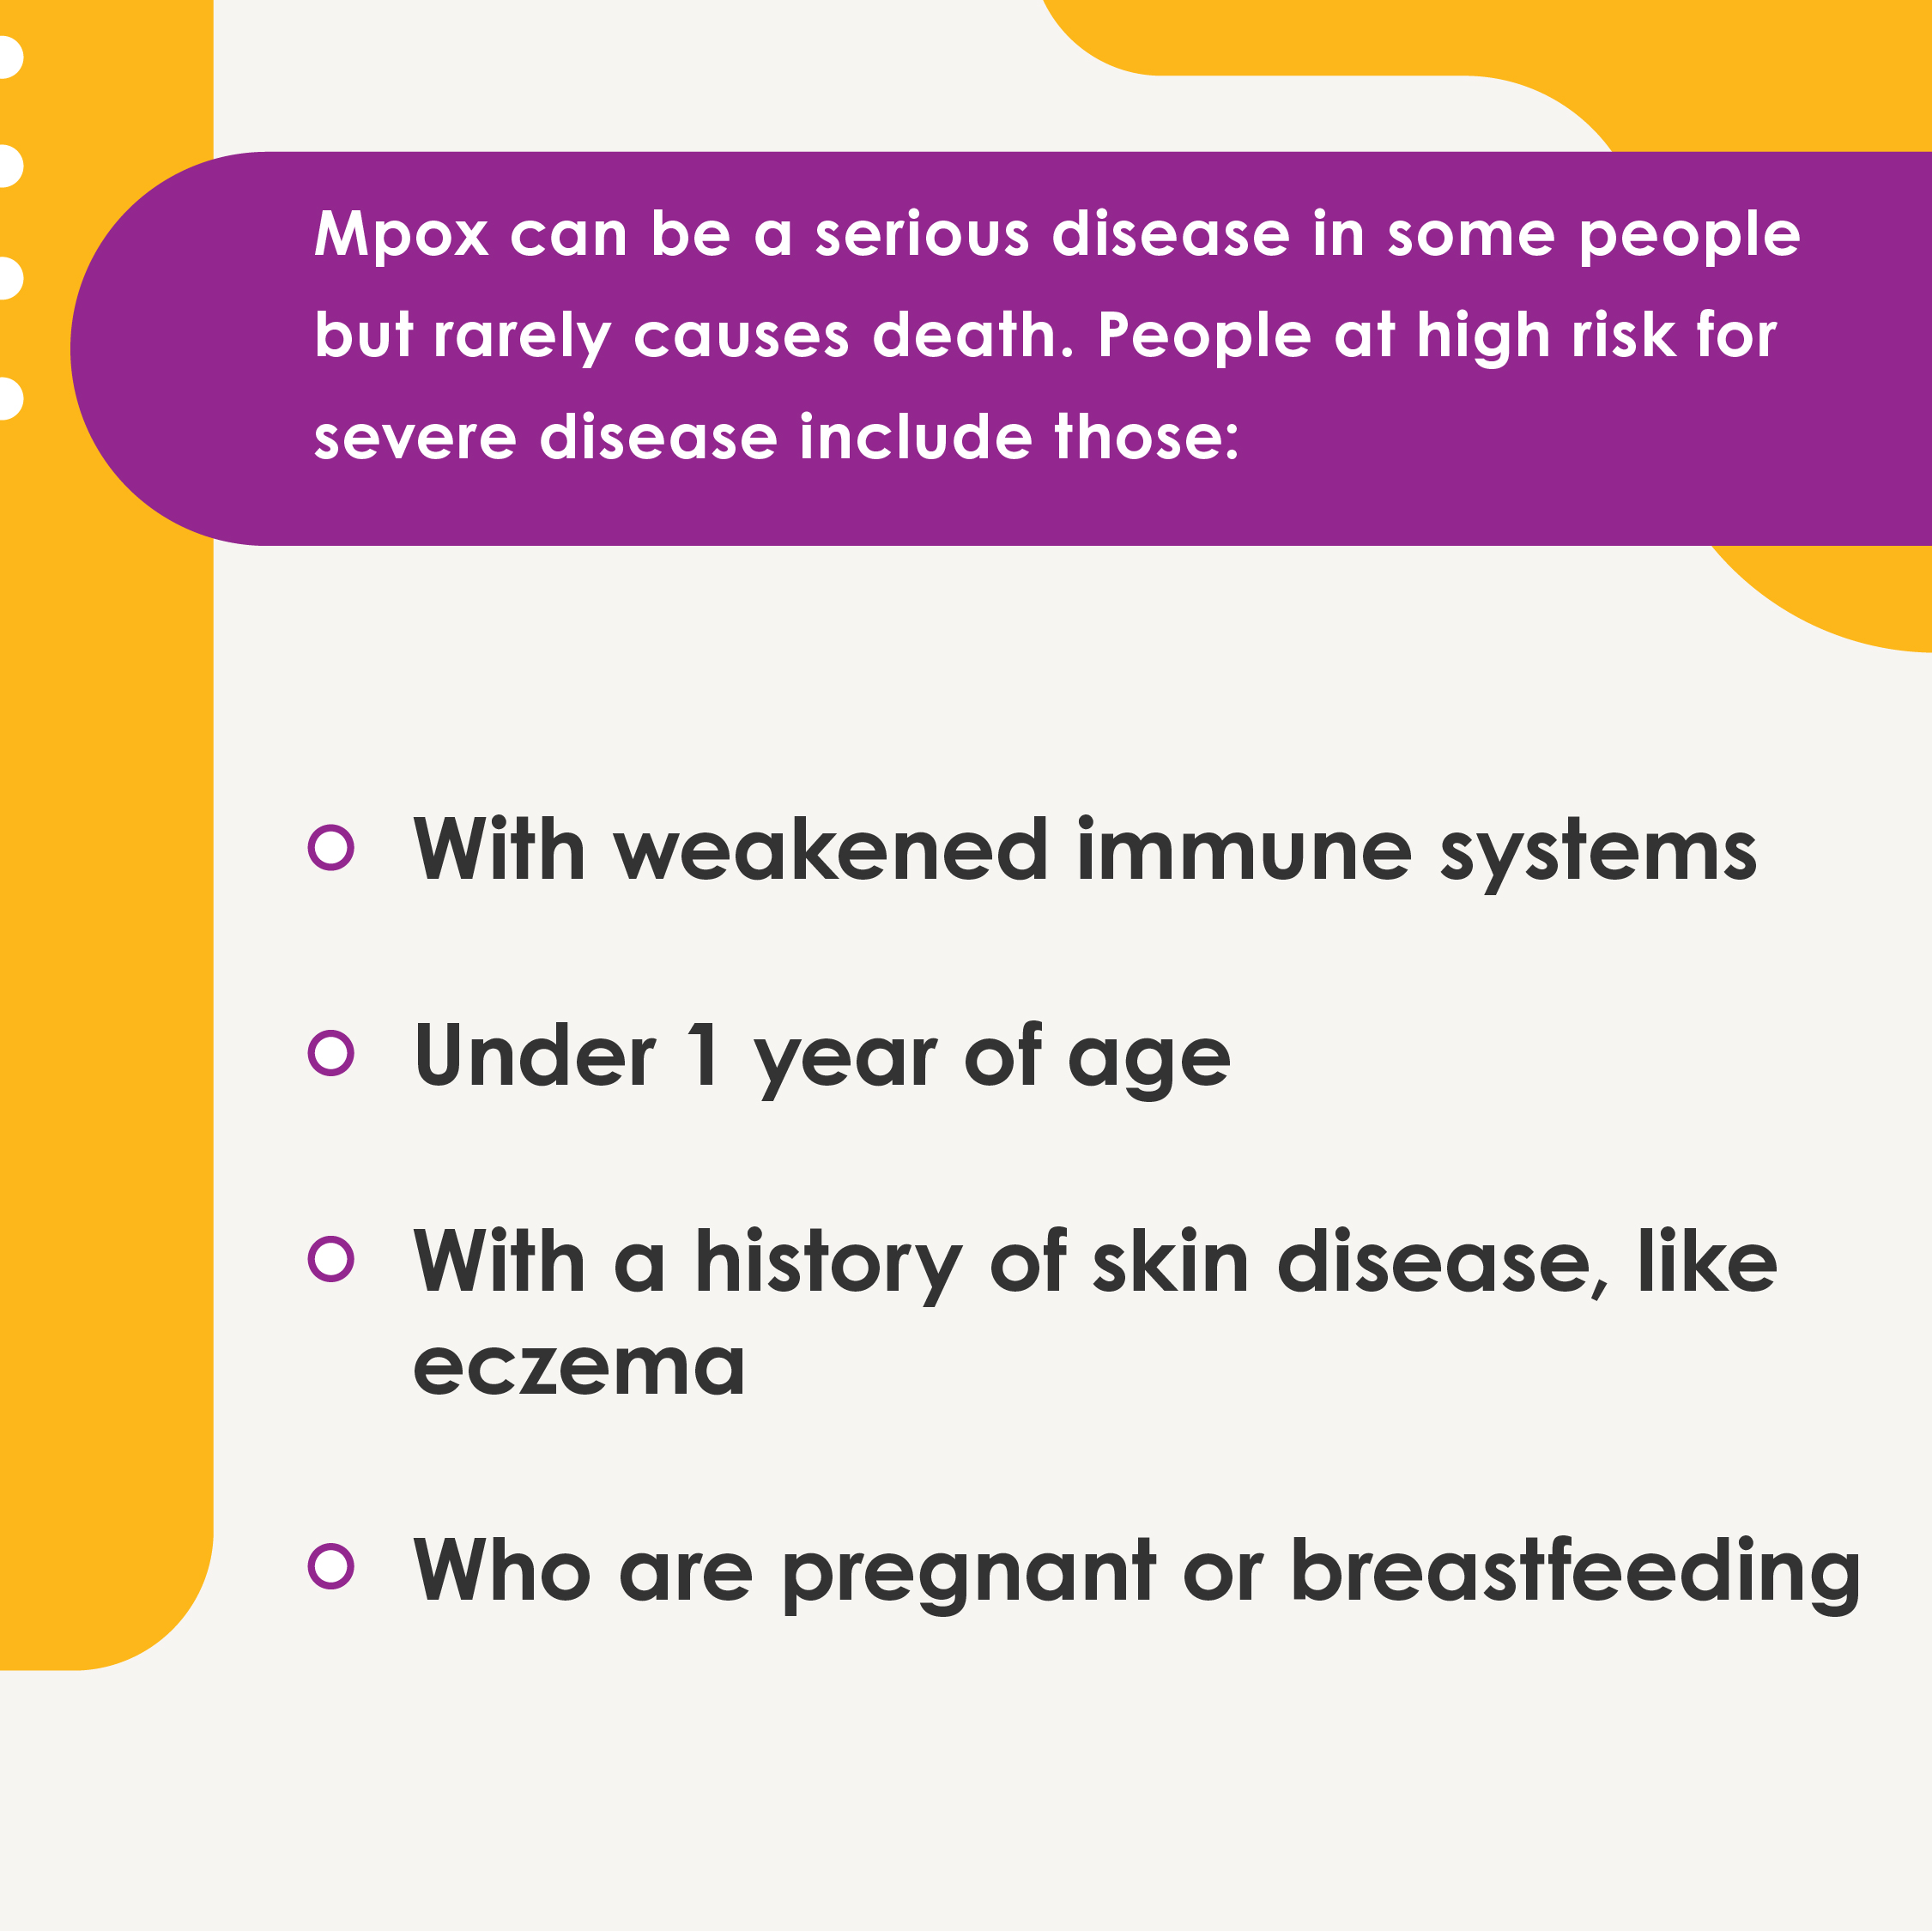 MPX can be a serious desiease in some people but rarely casues death. People at high risk for severe disease include those with 